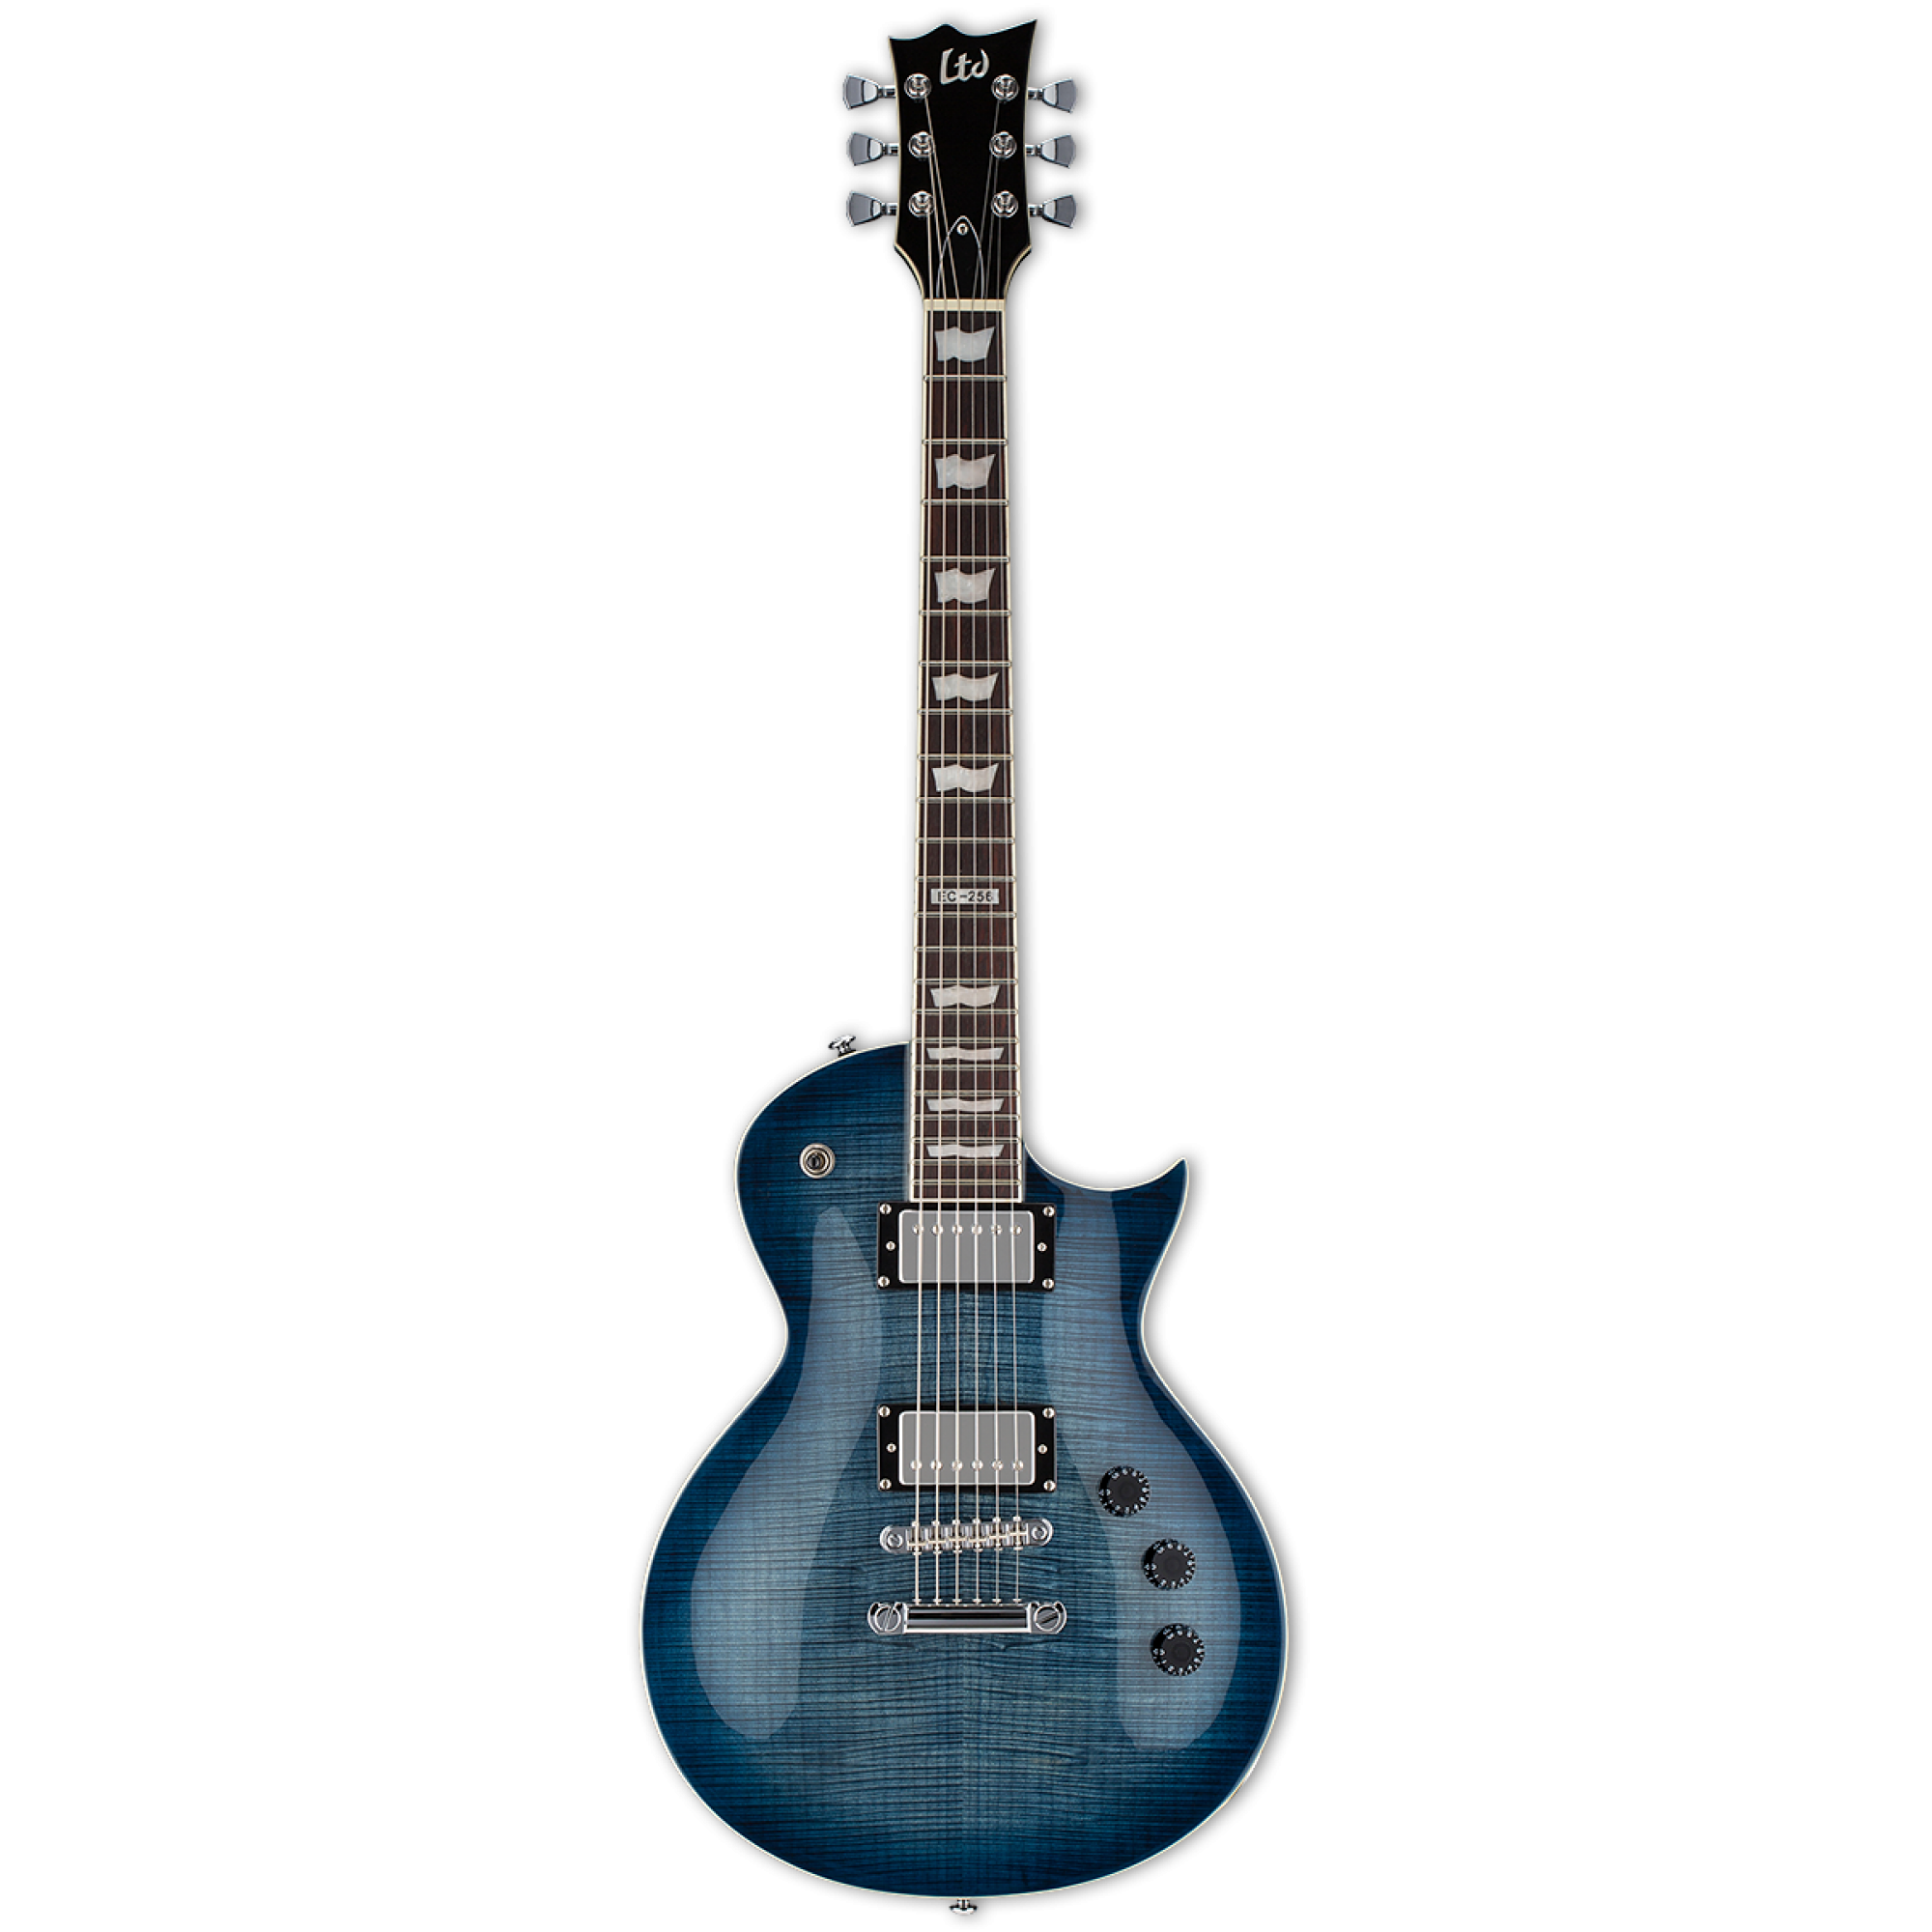 PLAYING GOD INTERACTIVE TAB by Bullet For My Valentine @ Ultimate-Guitar.Com